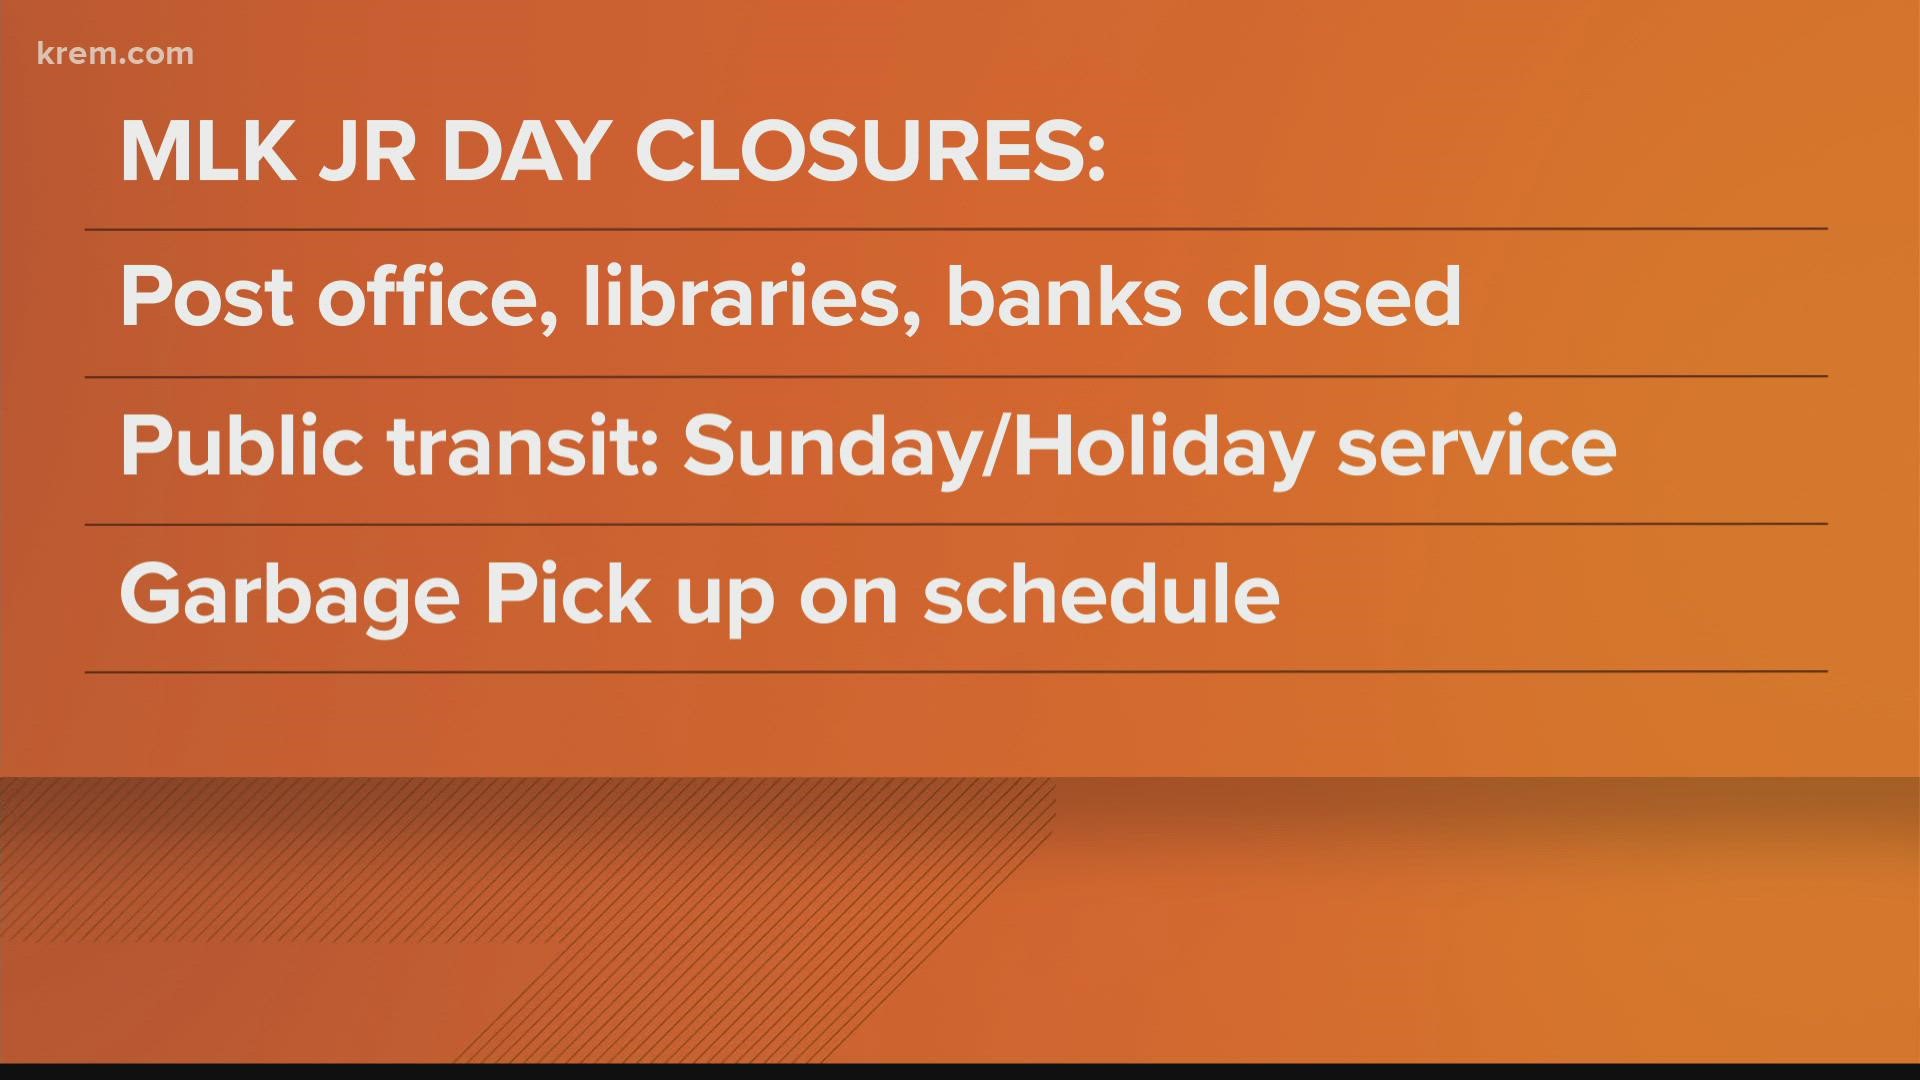 Because the day is a federal holiday, many businesses and government offices are closed in observance of the day.